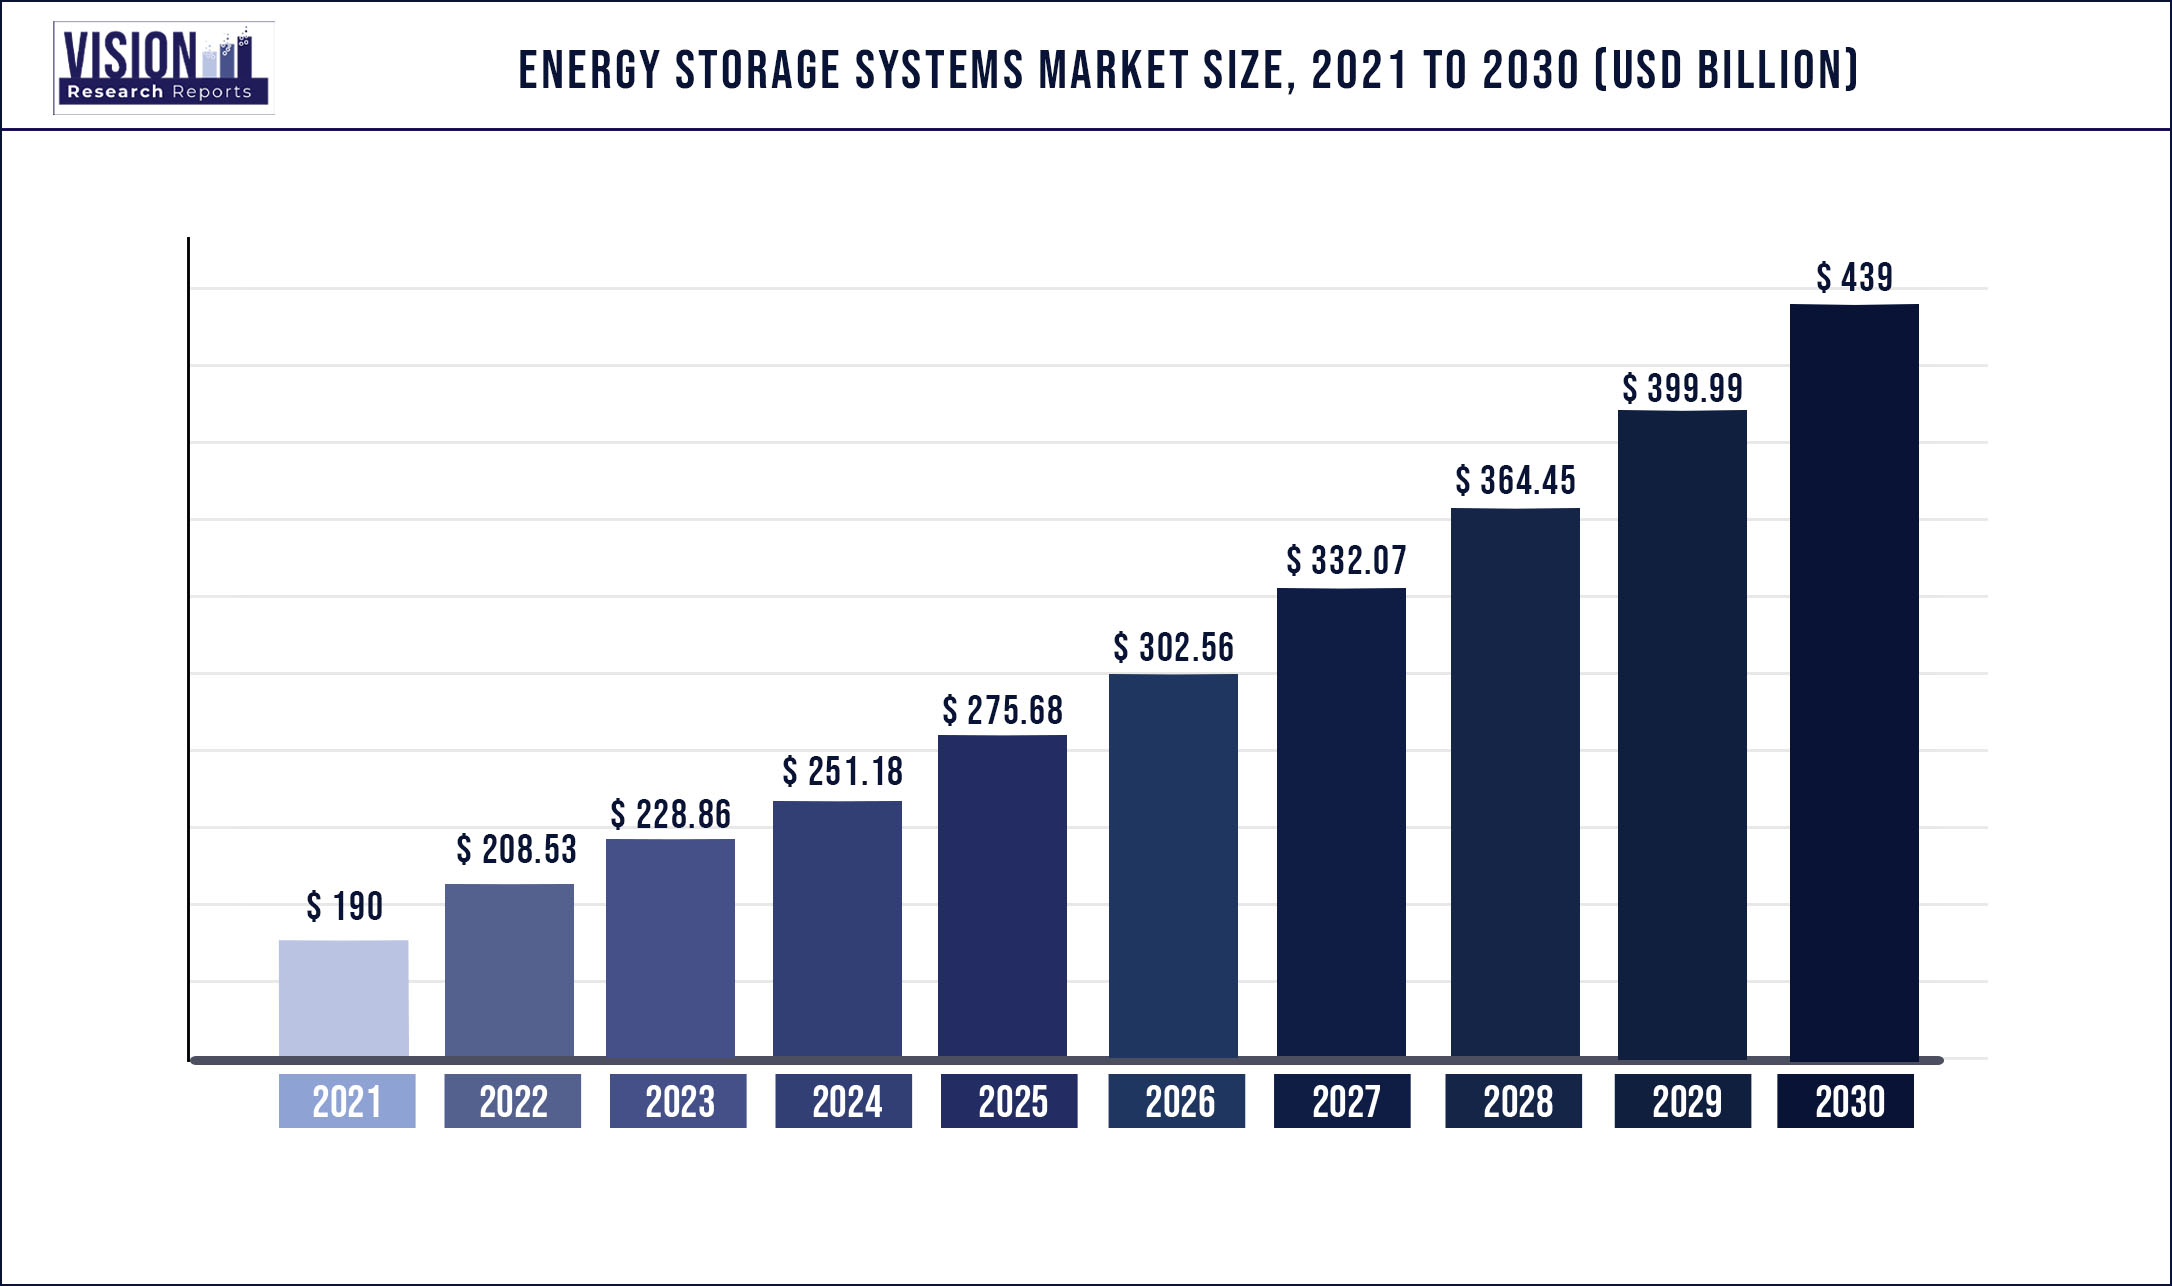 Energy Storage Systems Market Size 2021 to 2030